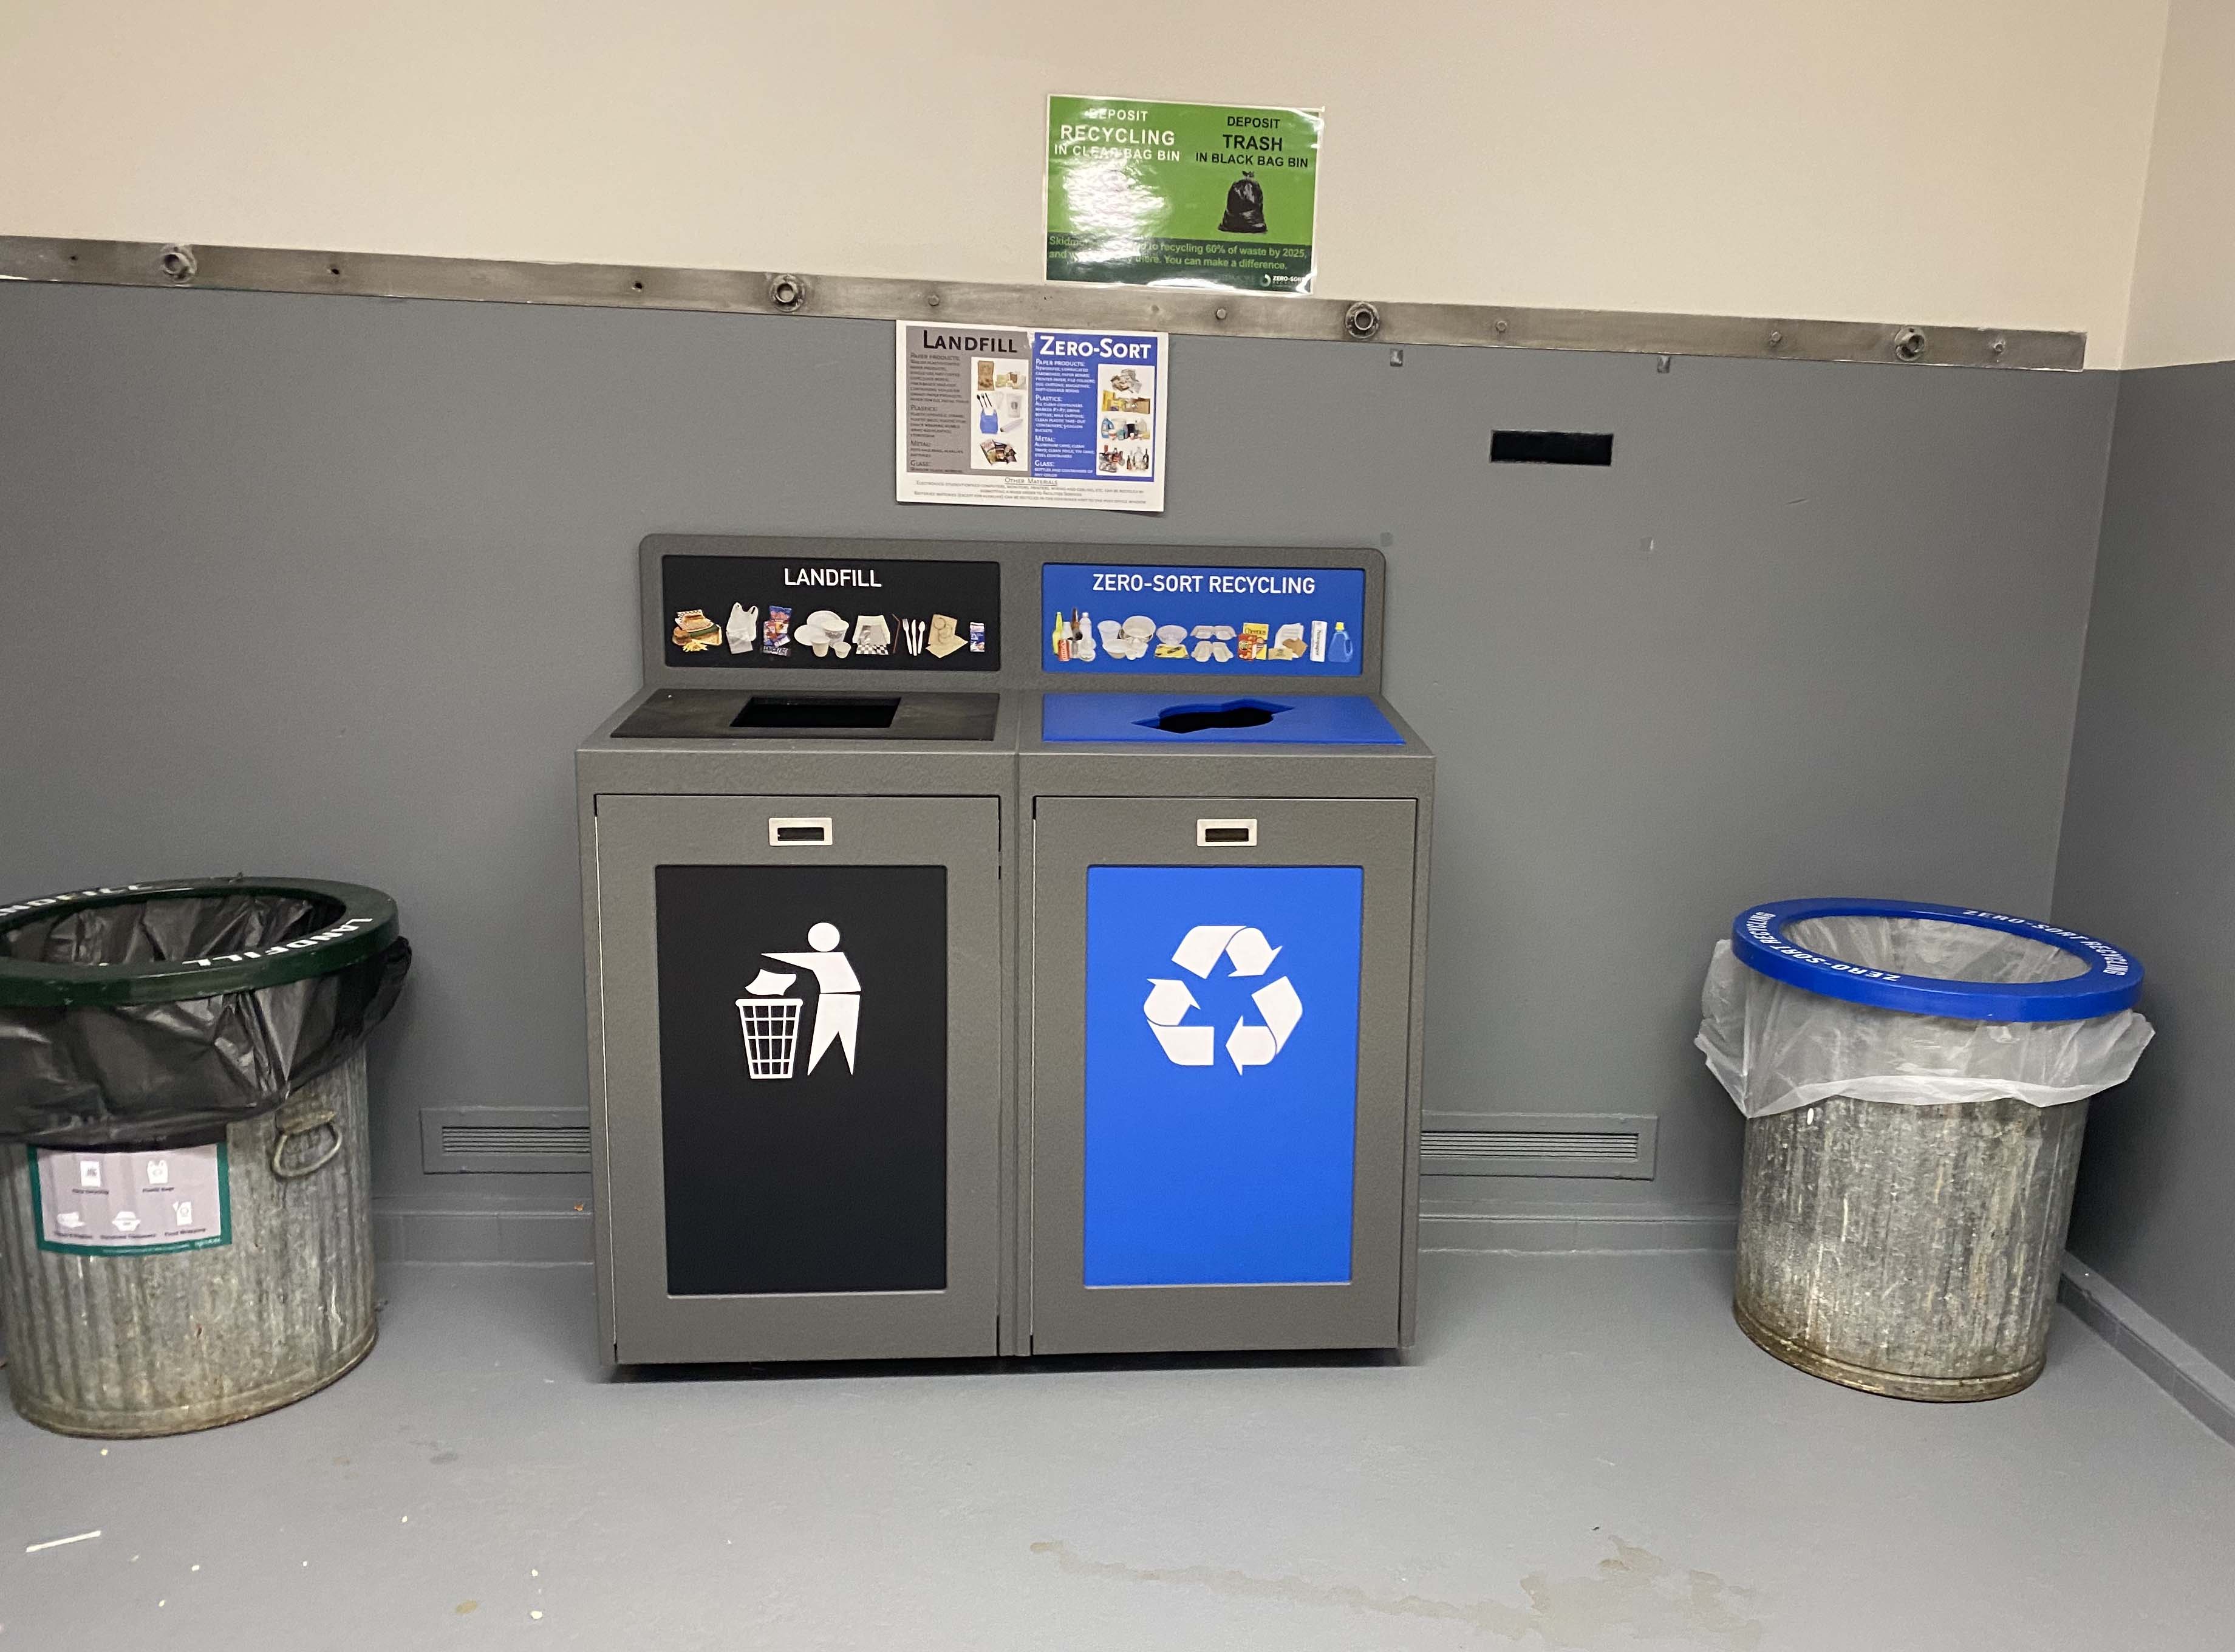 One combined unit for landfill and recycling in the middle, a recycling bin on the left and another landfill bin on the right.